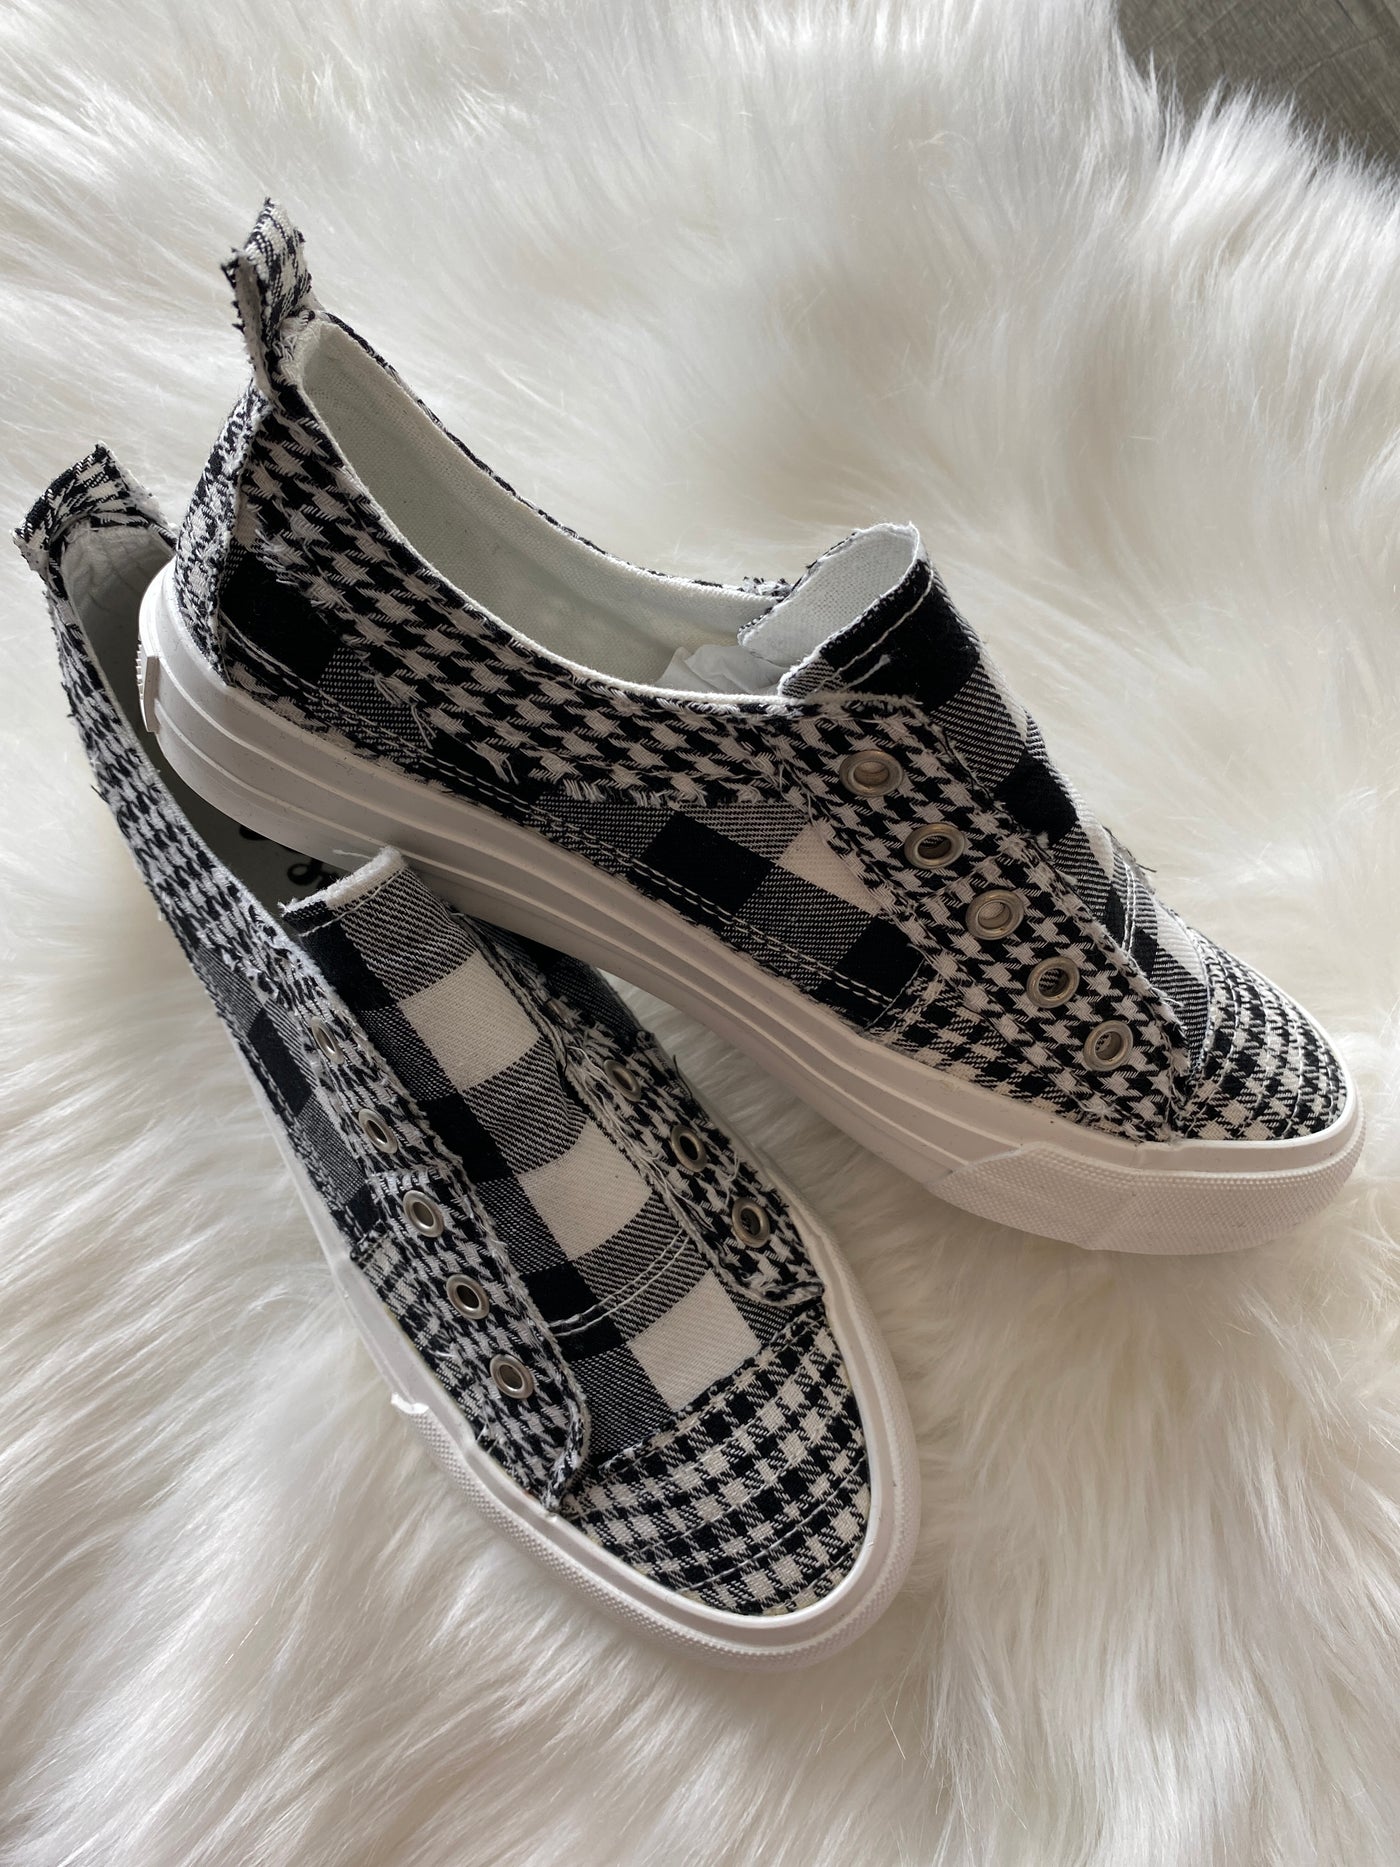 Mix Sneakers by Gypsy Jazz in White/Black